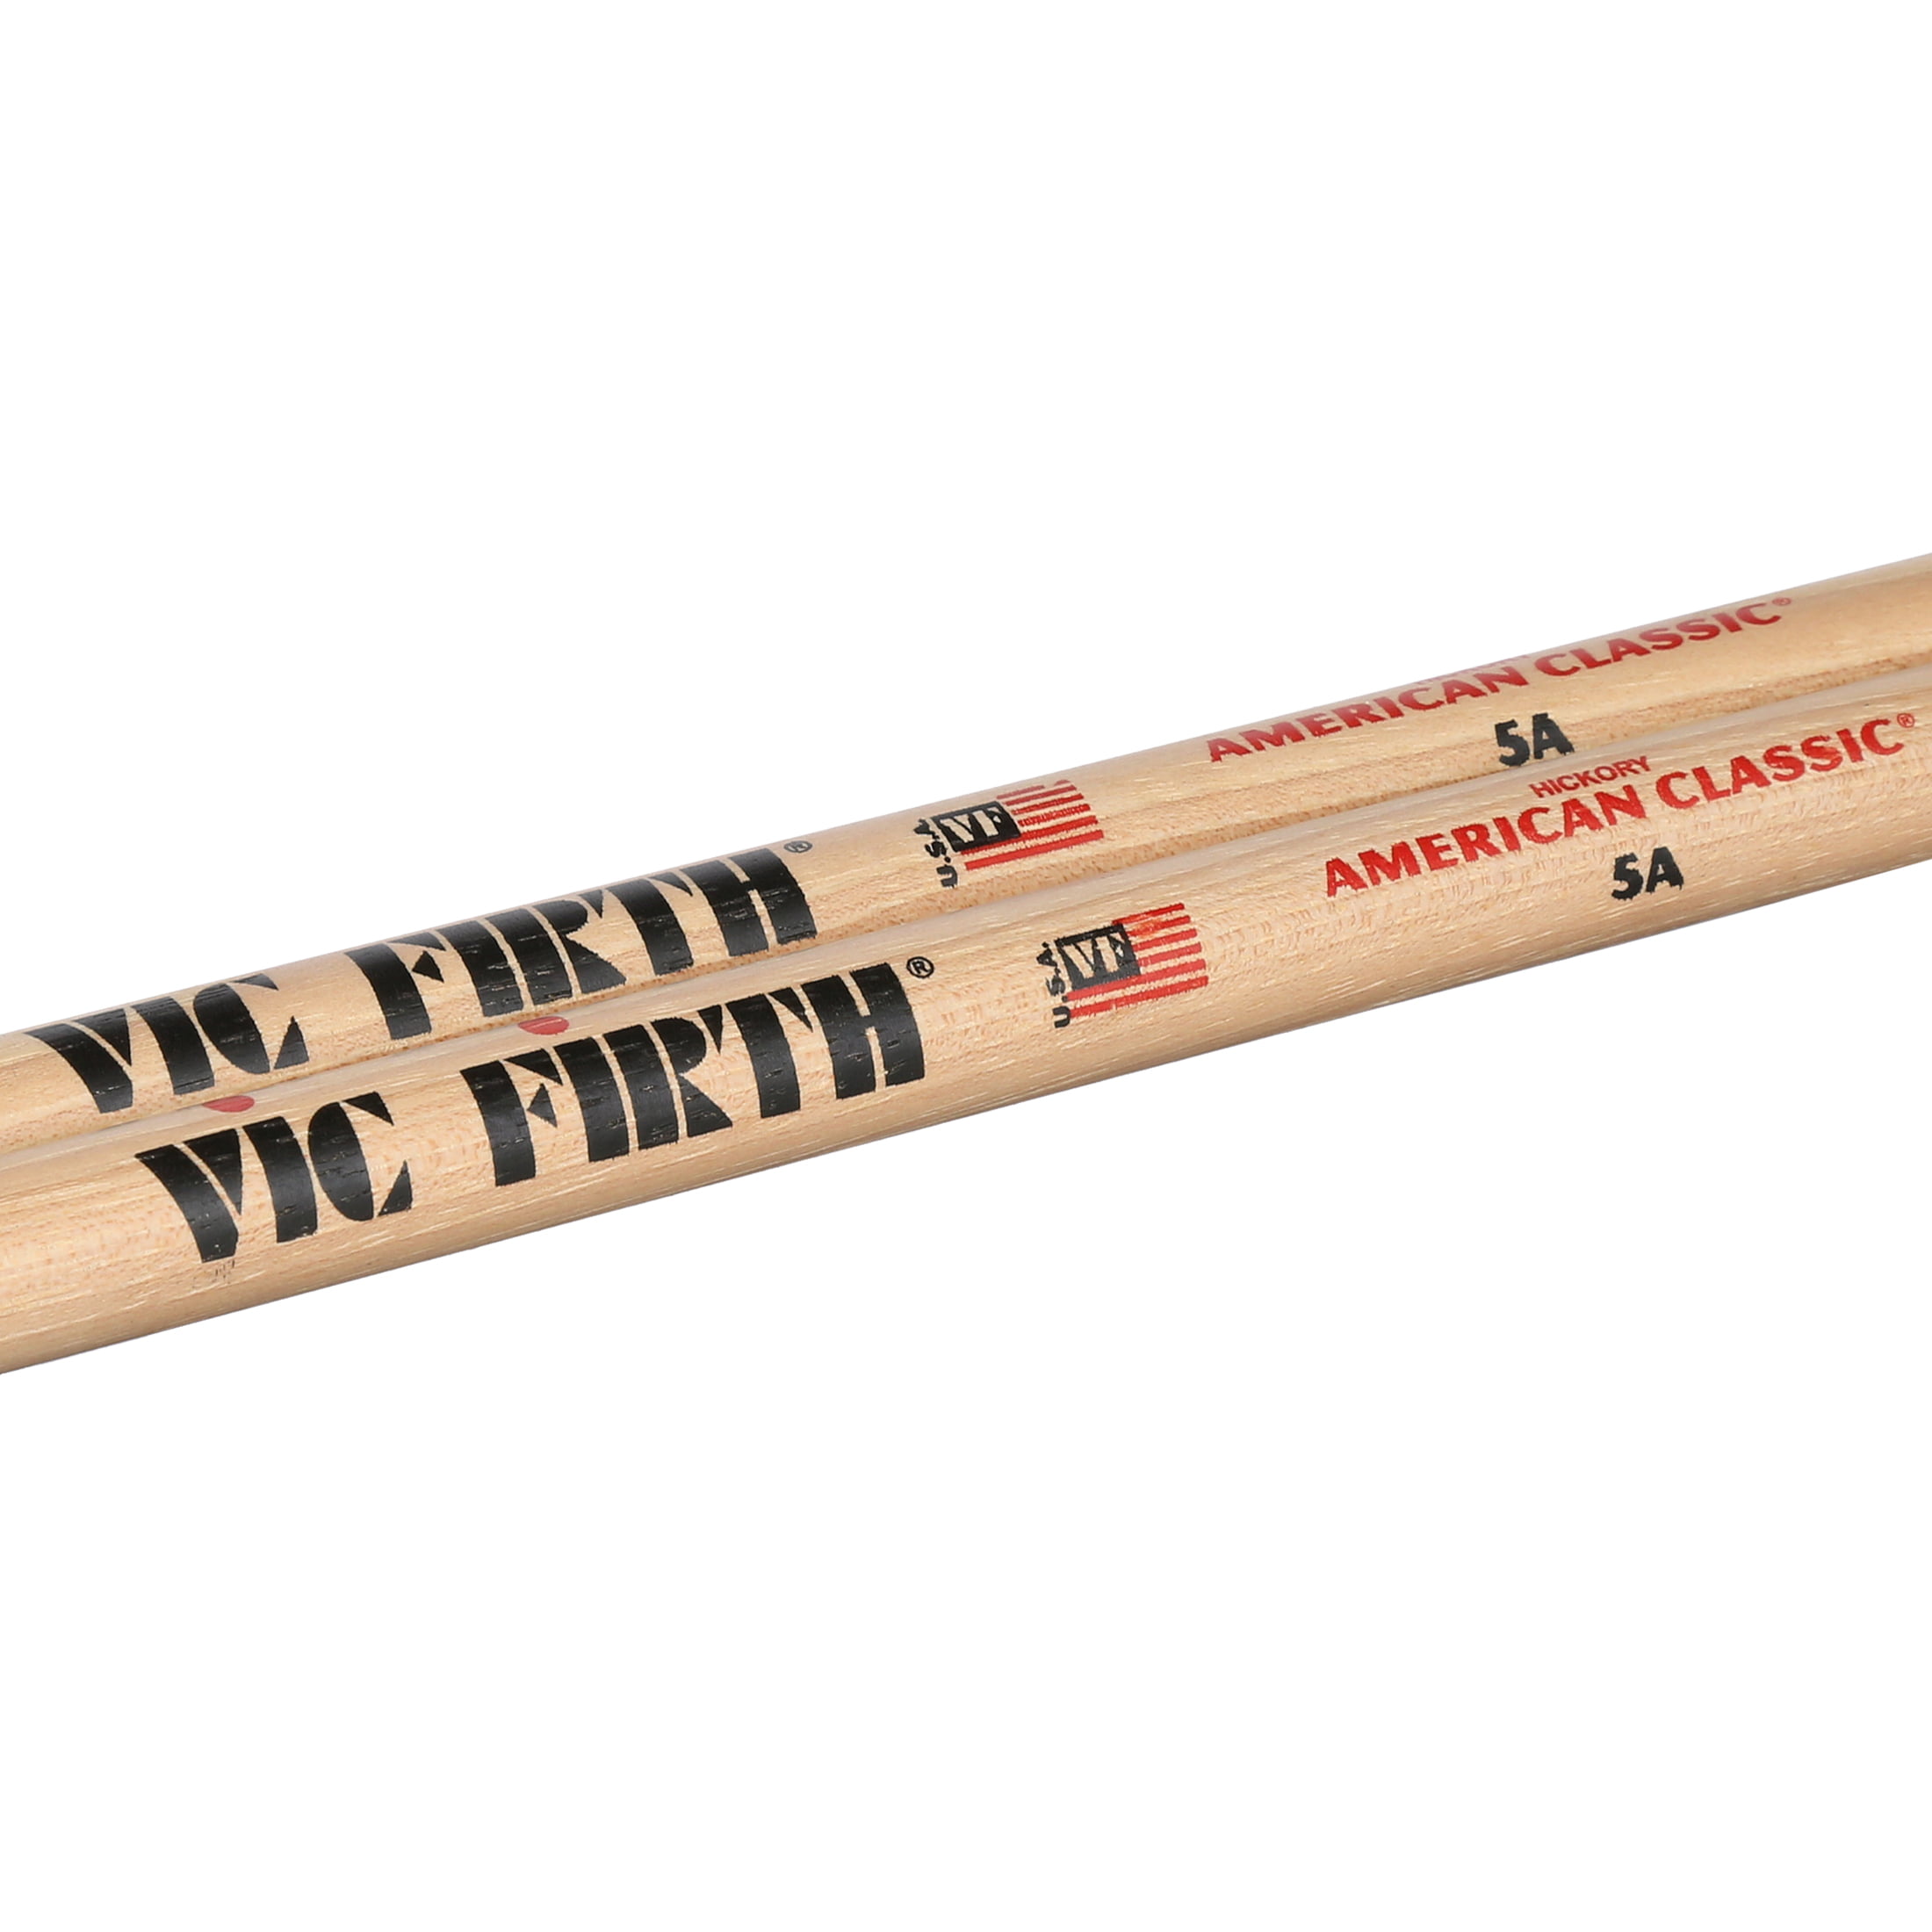 Buy Vic Firth 5A American Classic Hickory Wood Tip Drumsticks